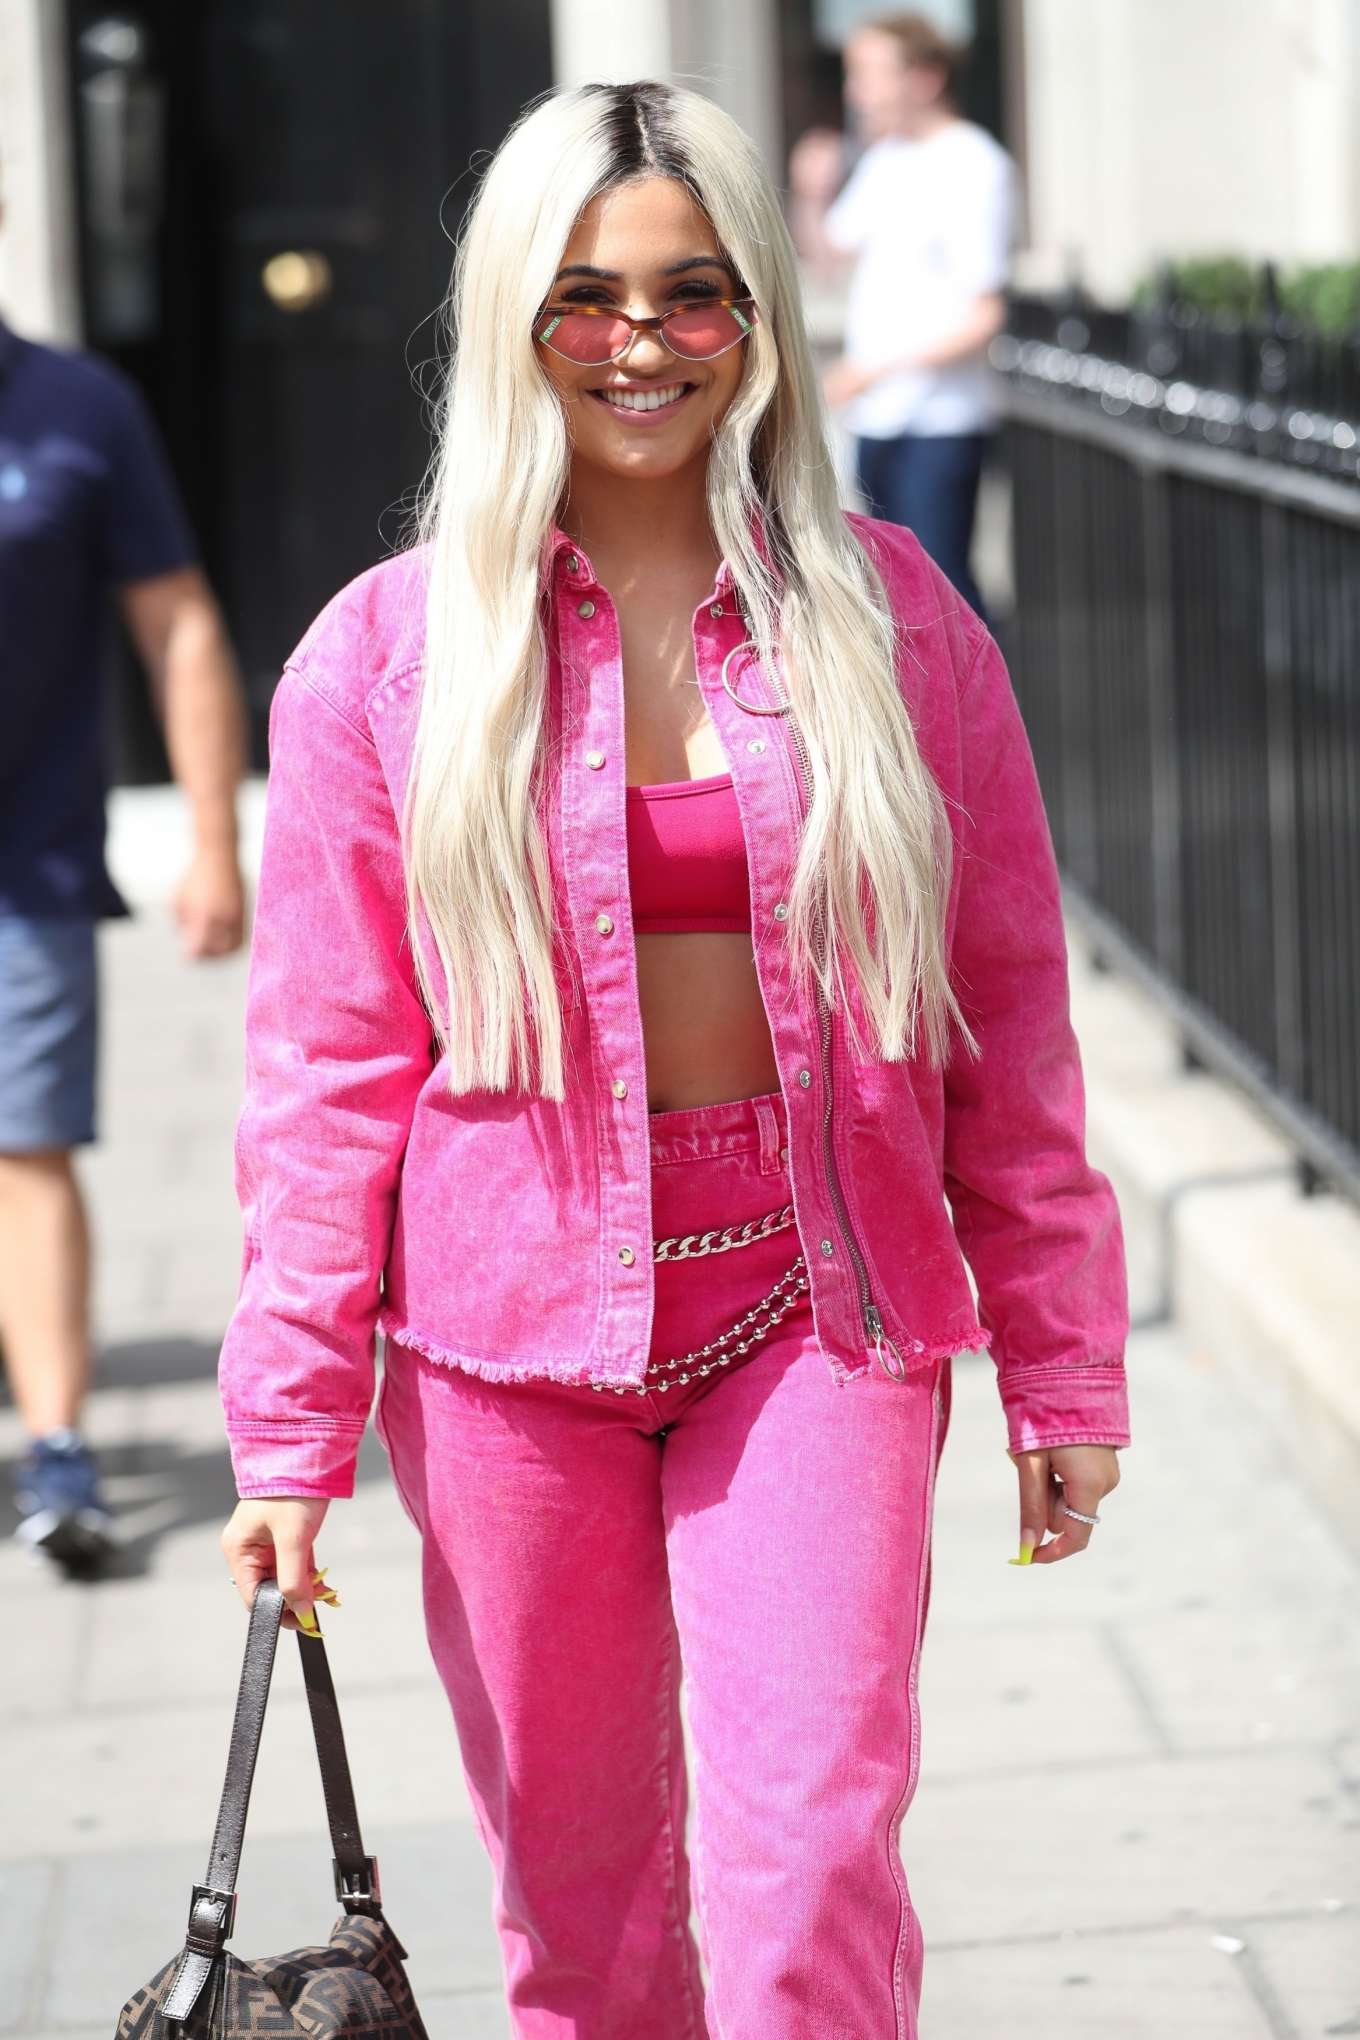 Mabel In Pink Outfit â€“ Exits Kiss FM Studios In London